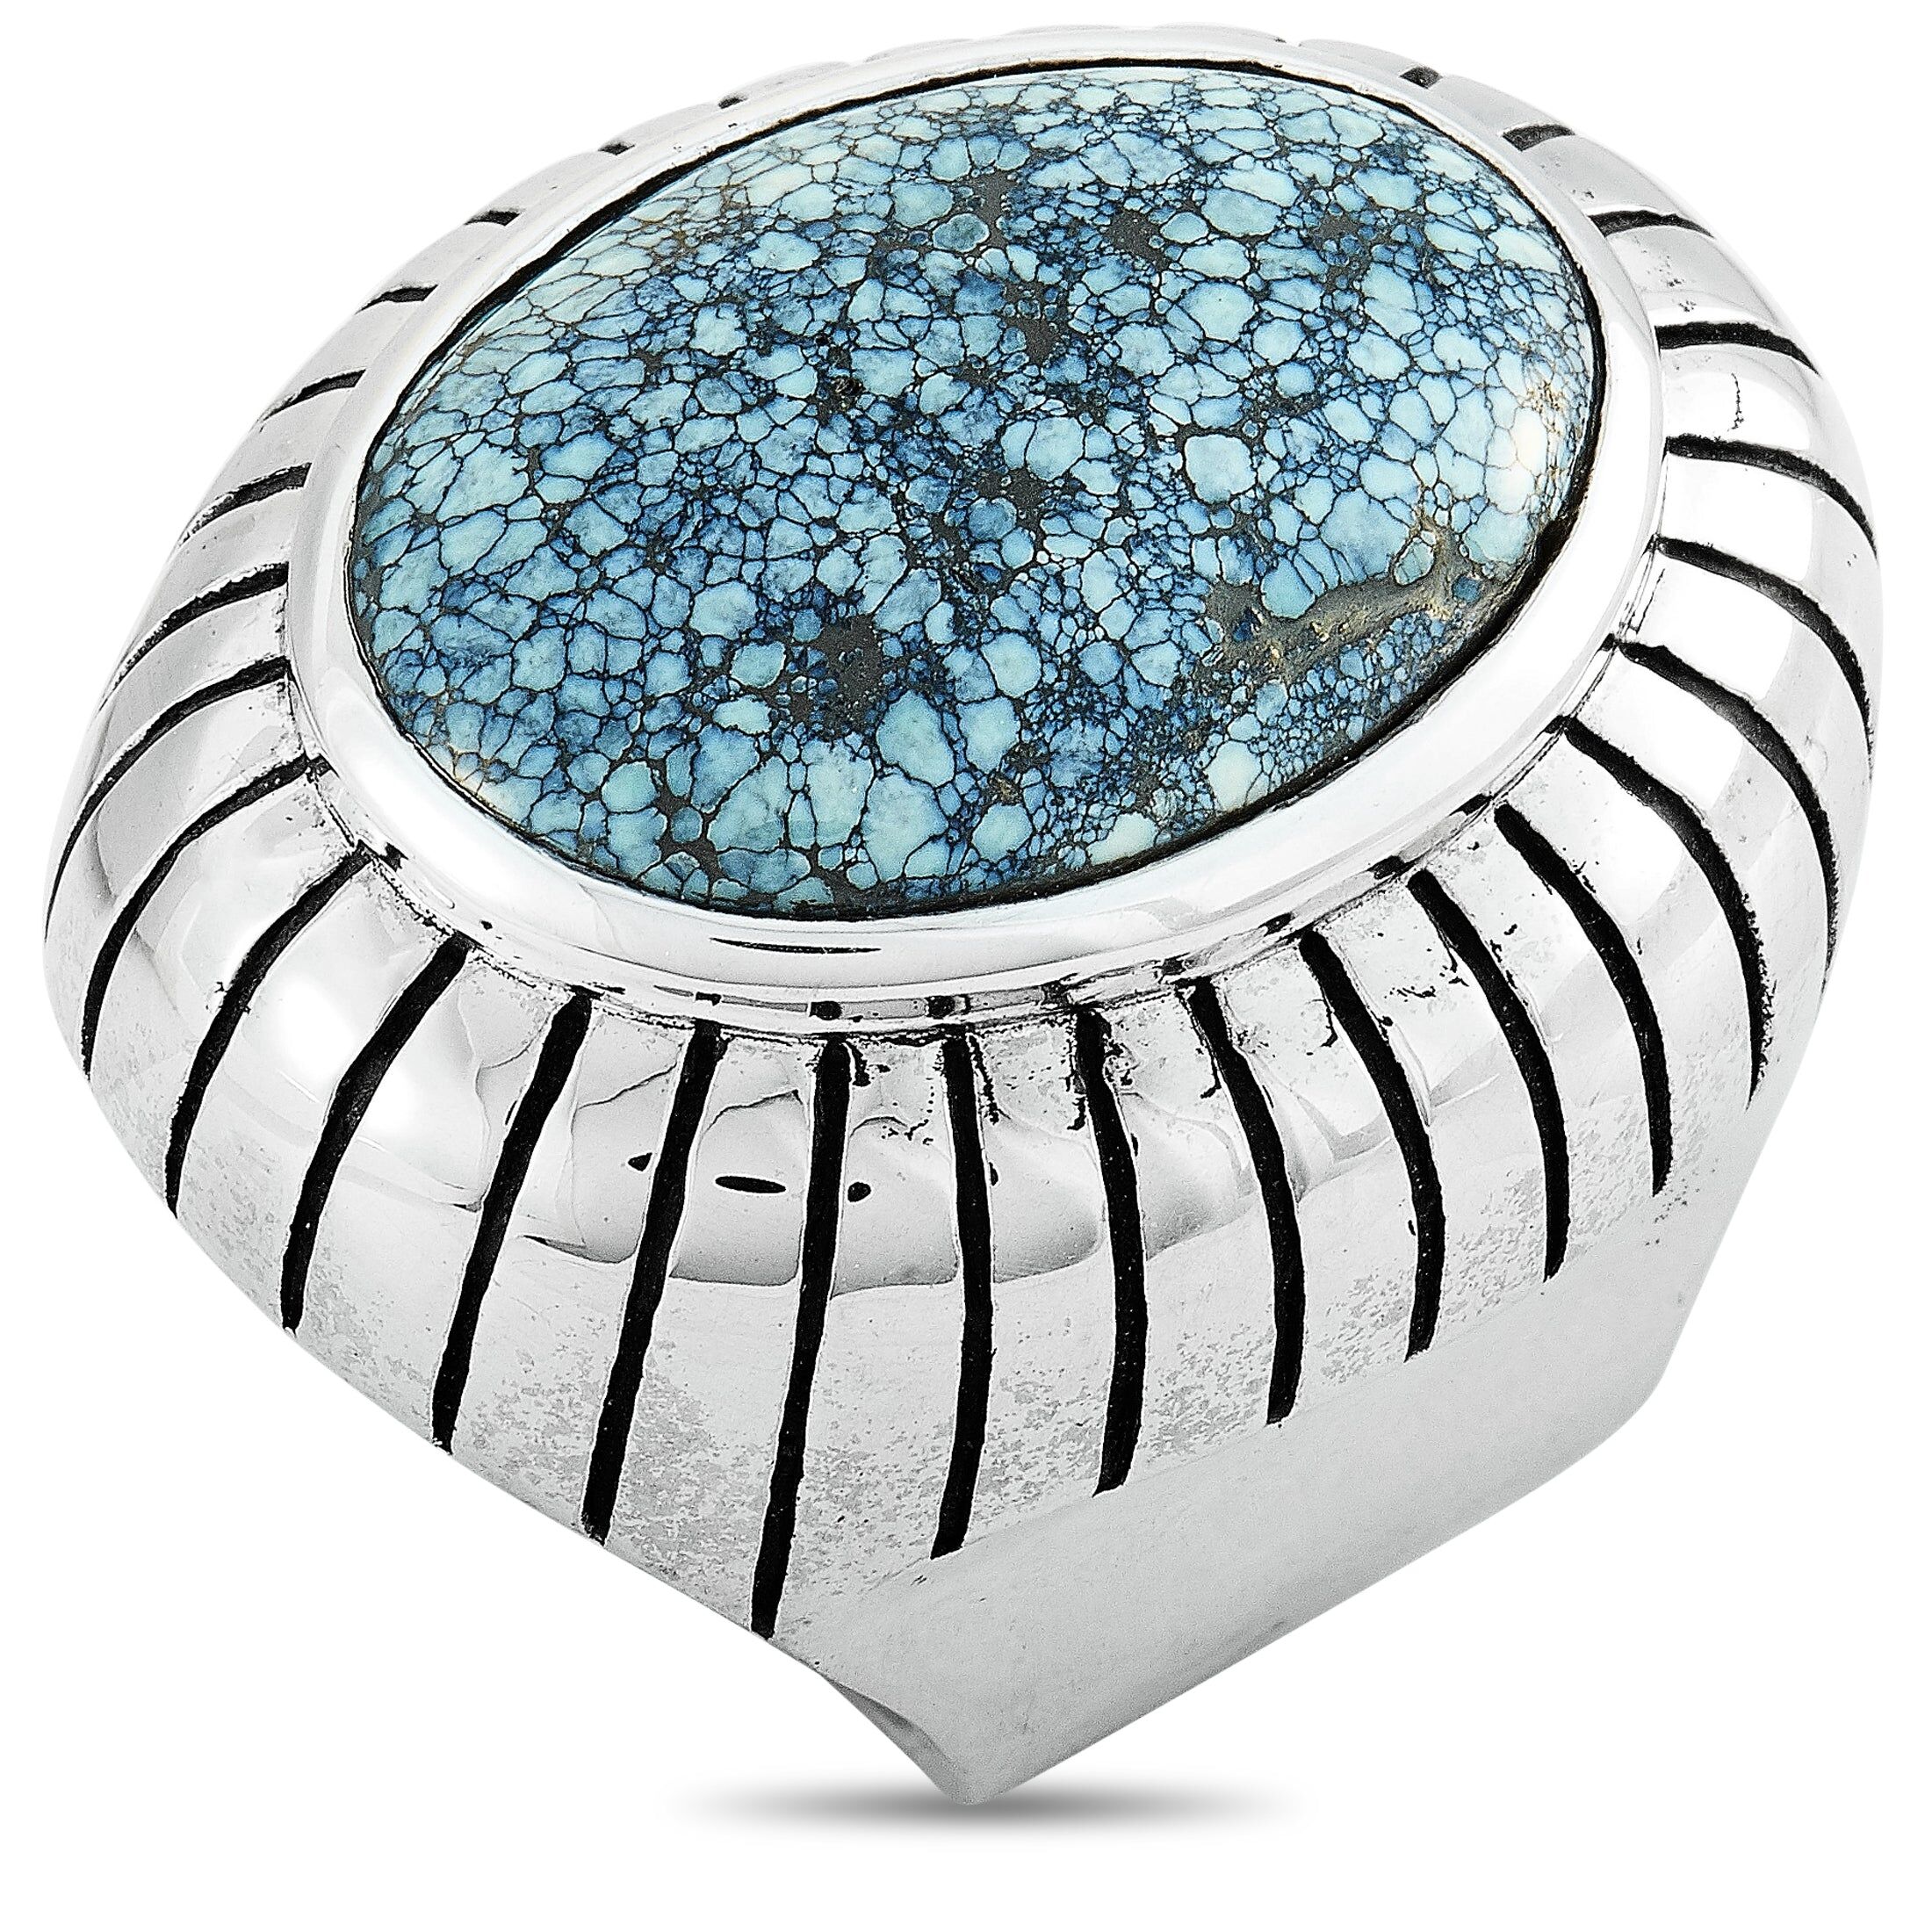 King Baby Silver and Spotted Turquoise Ring US 6.5 female